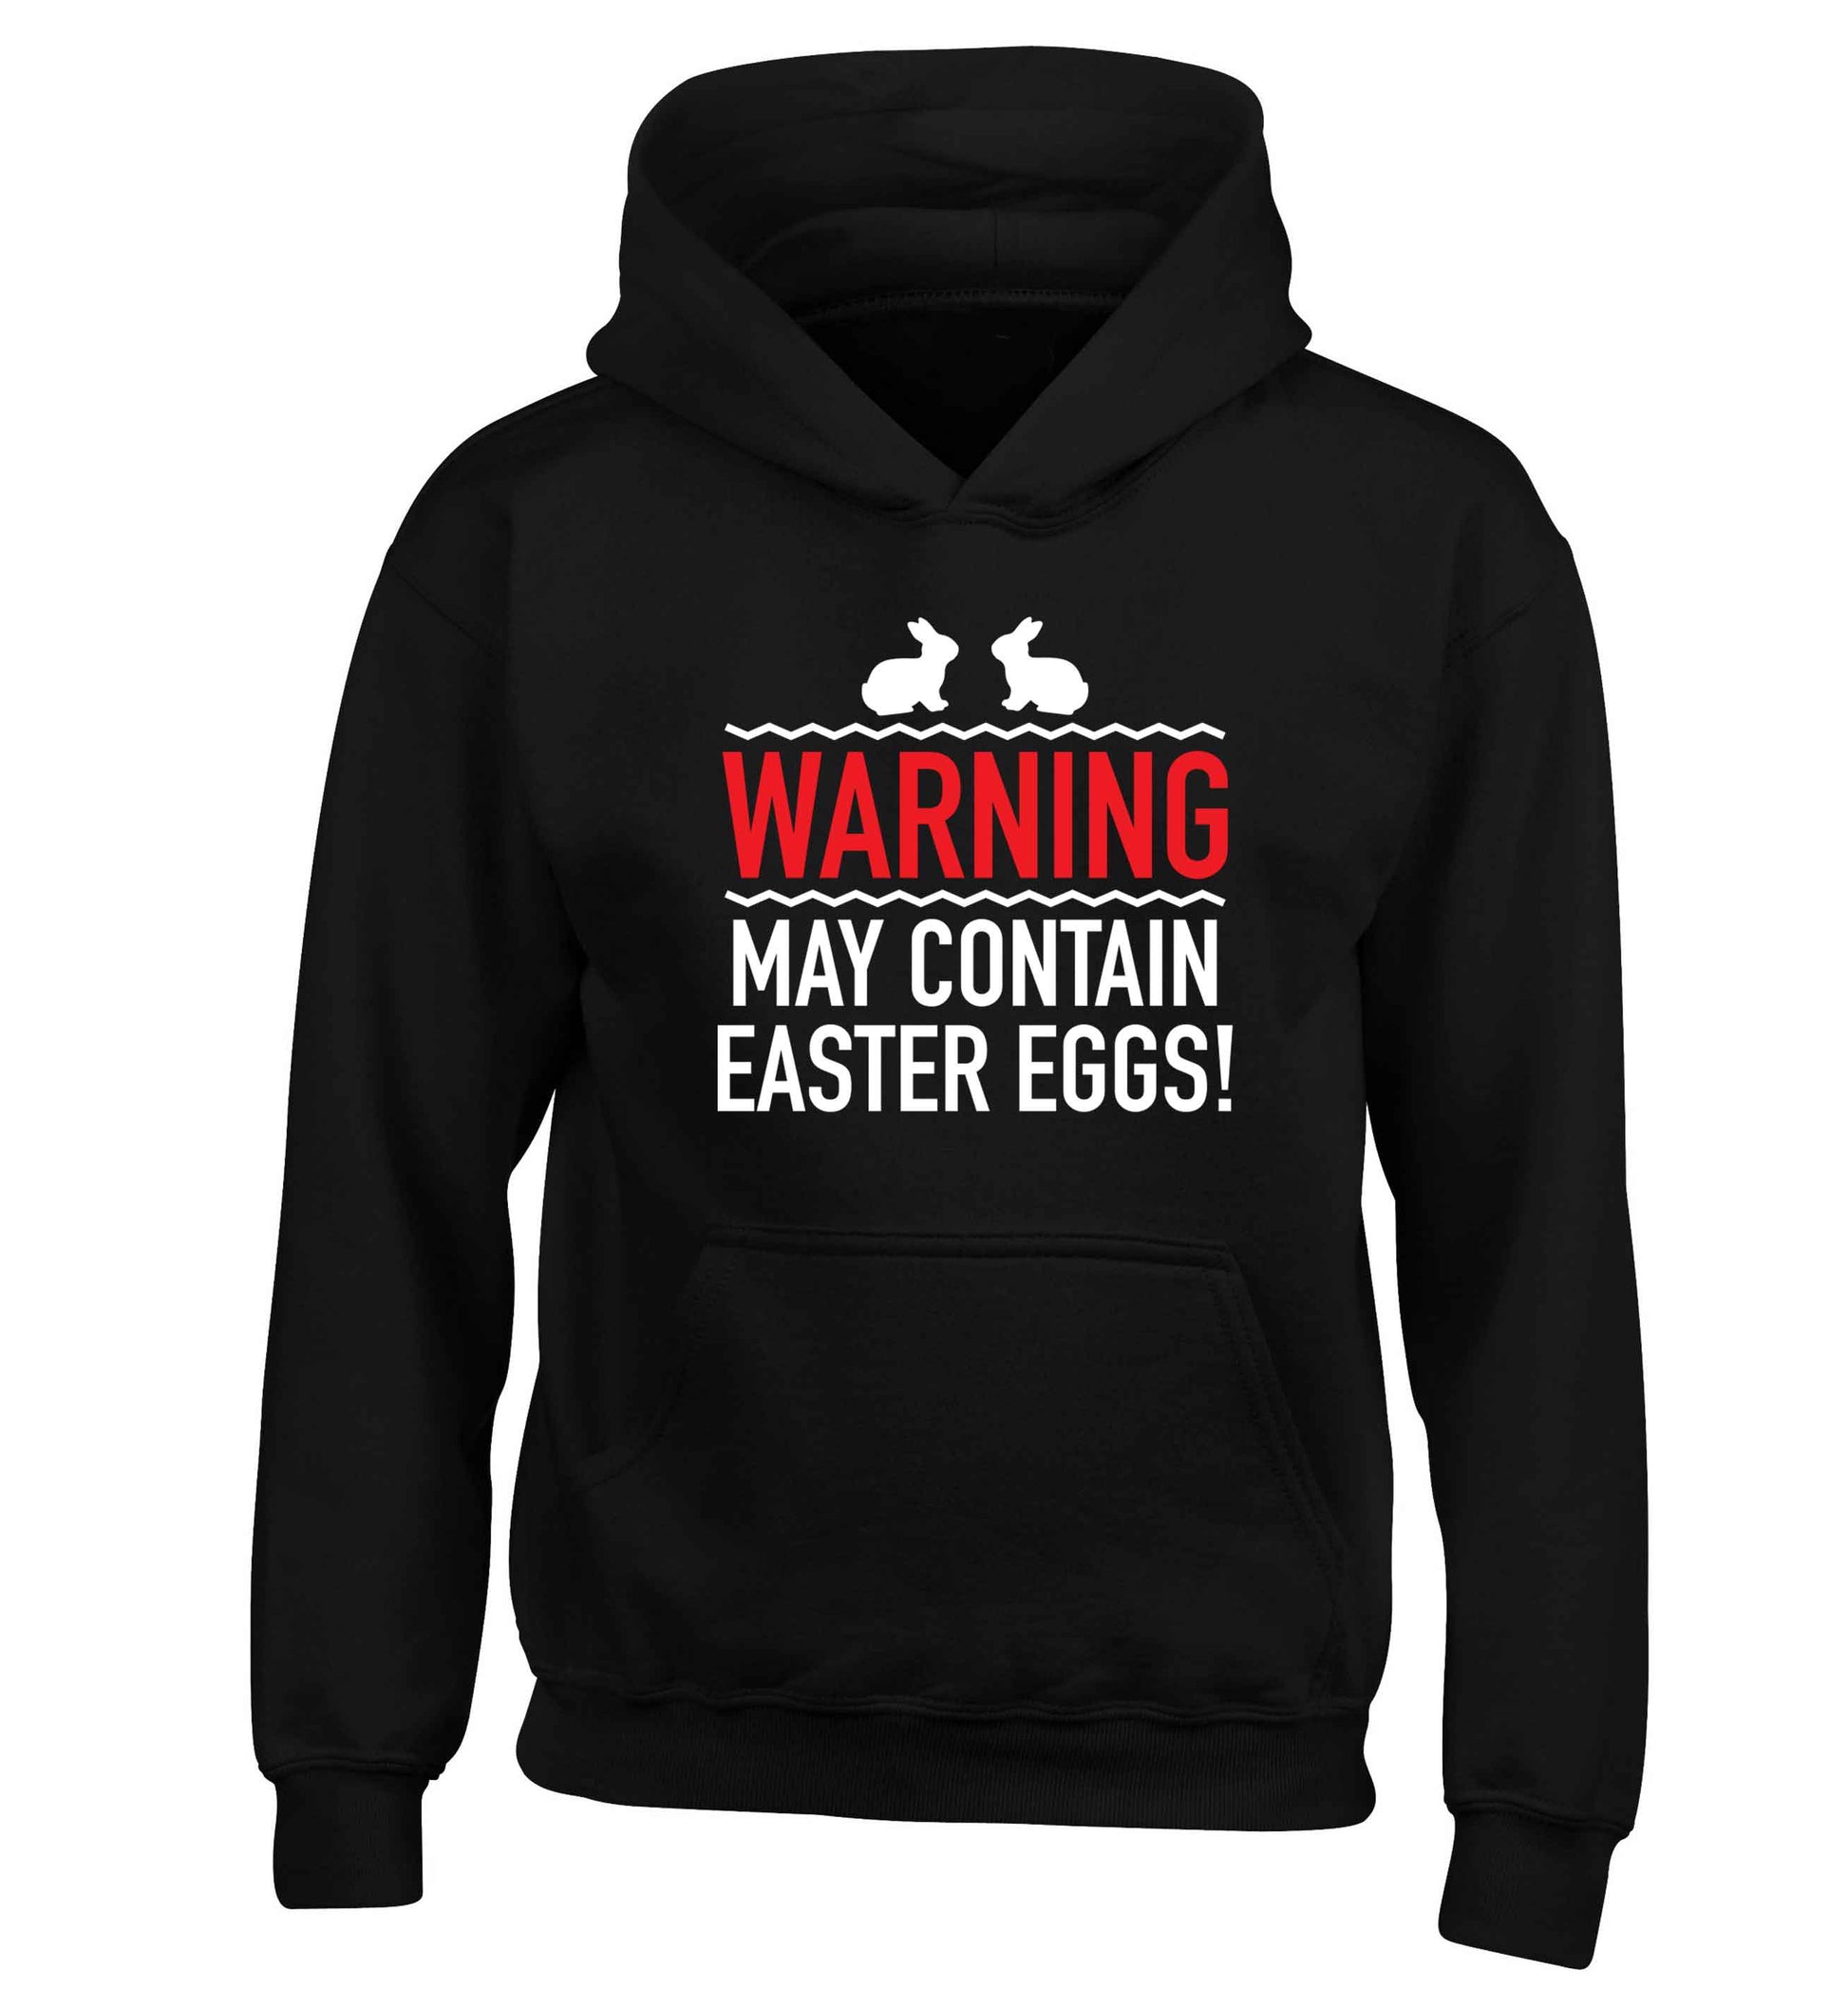 Warning may contain Easter eggs children's black hoodie 12-13 Years